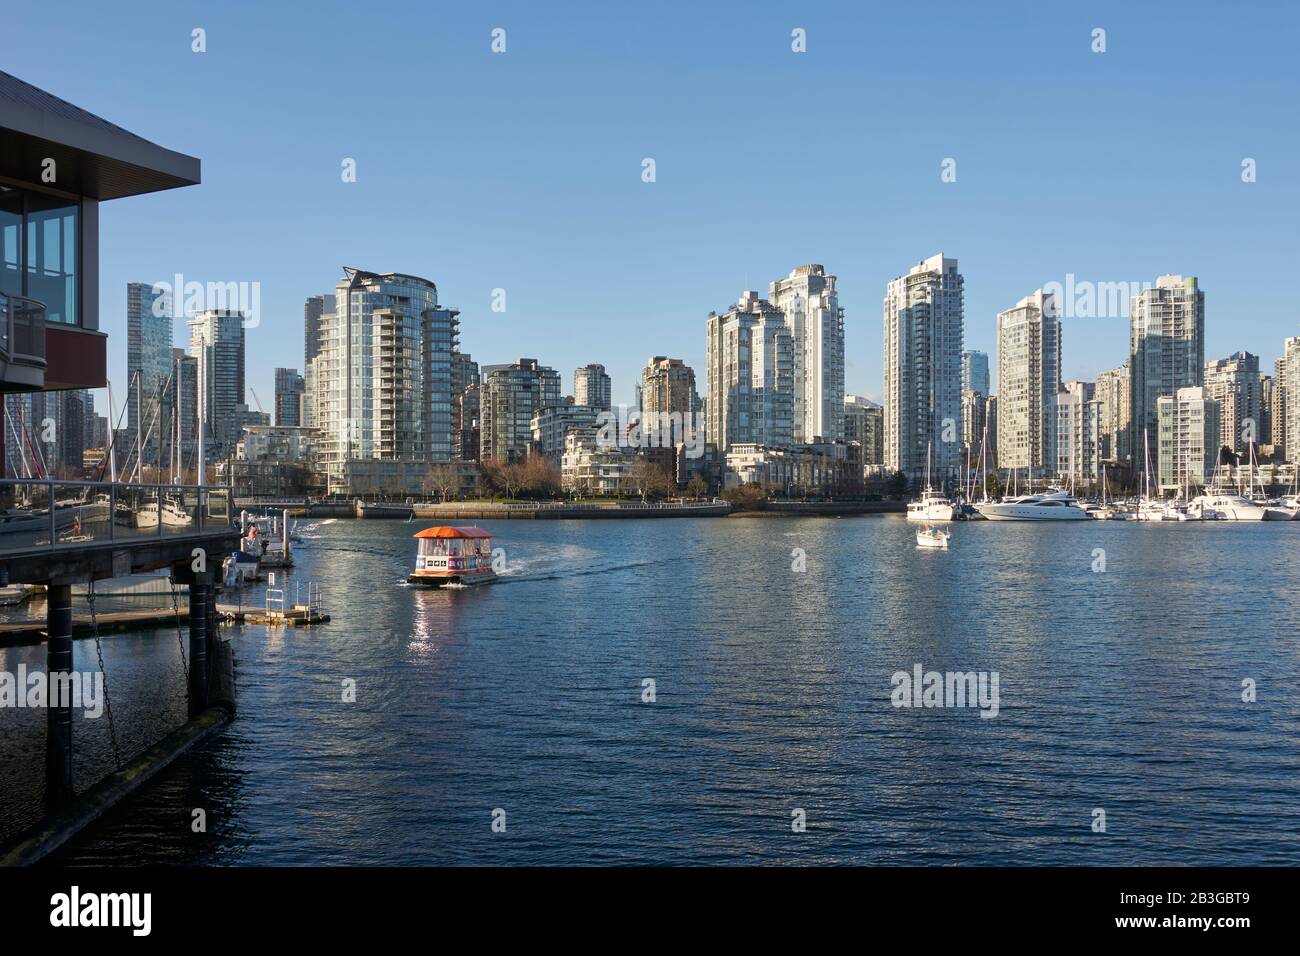 An Aquabus ferry crossing False Creek with with Yaletown skyline in back, Vancouver, BC, Canada Stock Photo